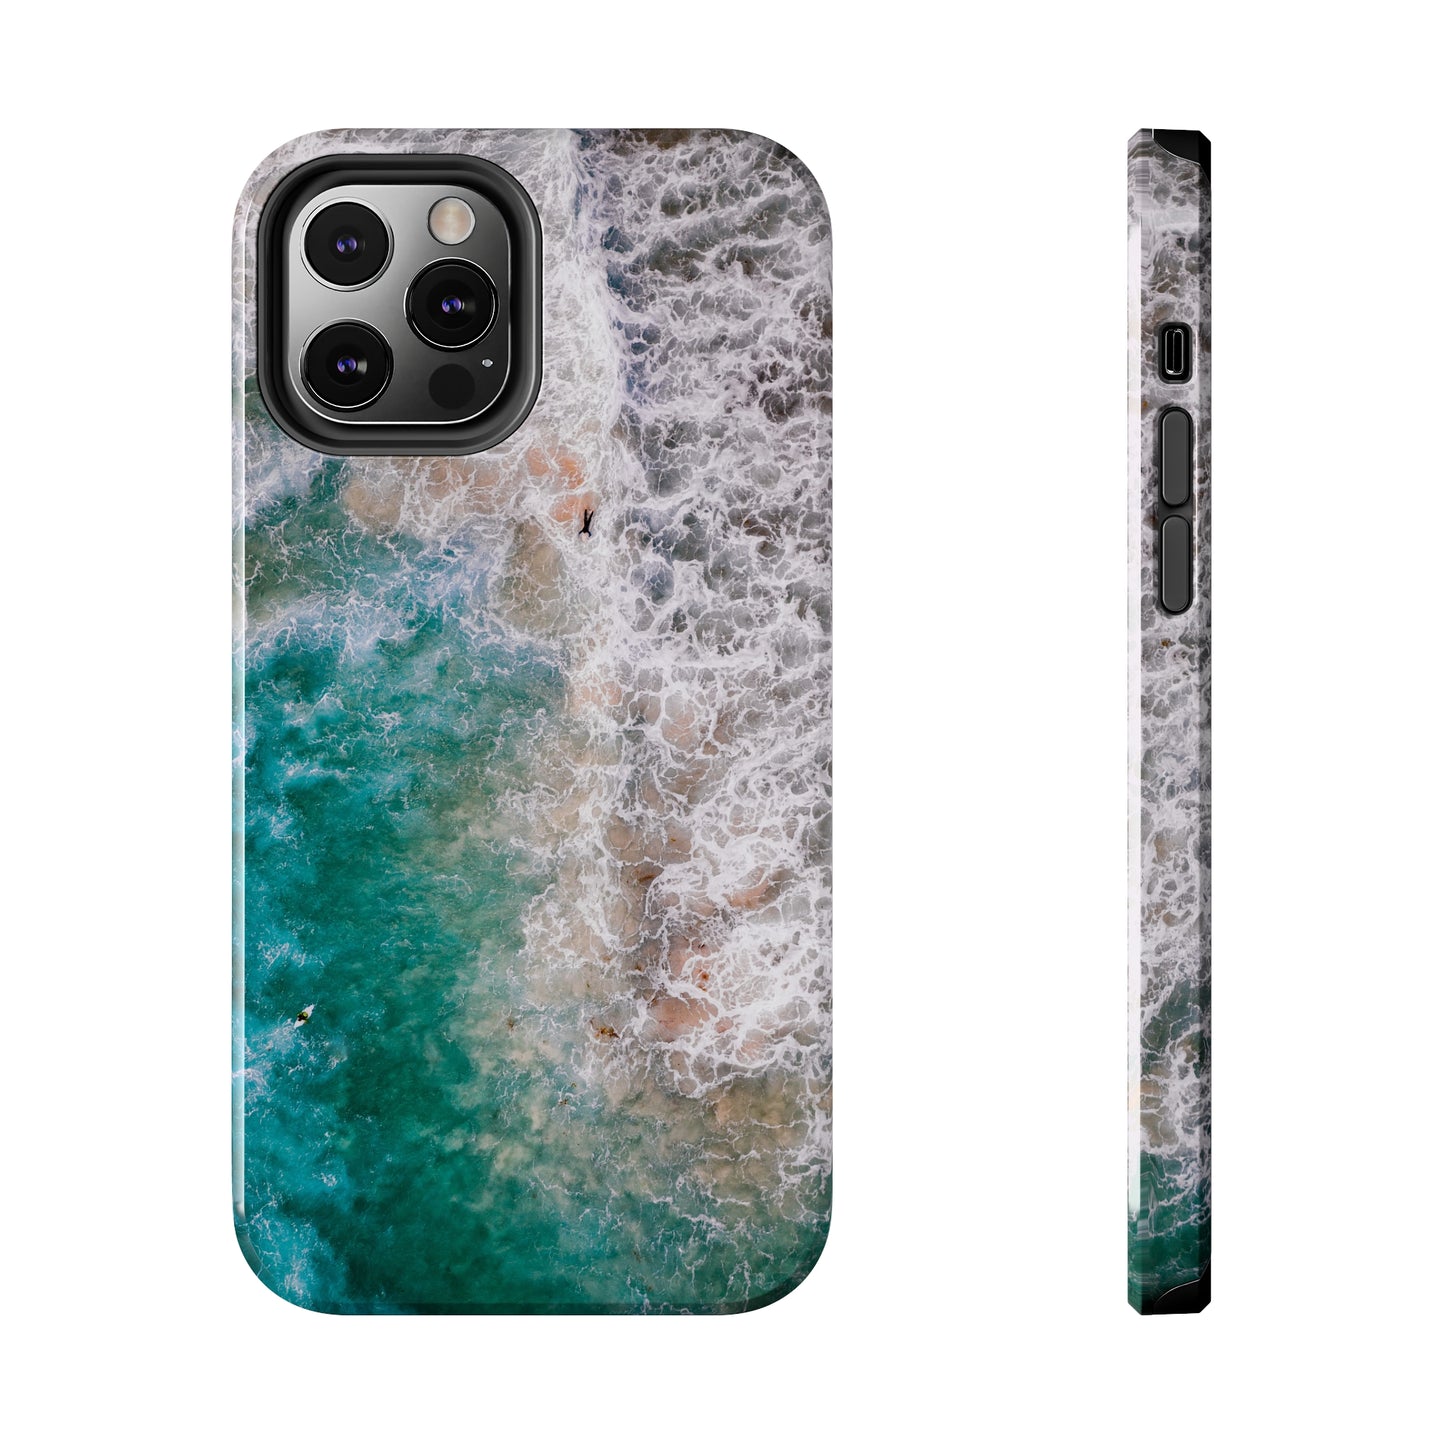 Ocean's Embrace: Deep Green Waters with White Waves Crashing onto the Beach Design Iphone Tough Phone Case